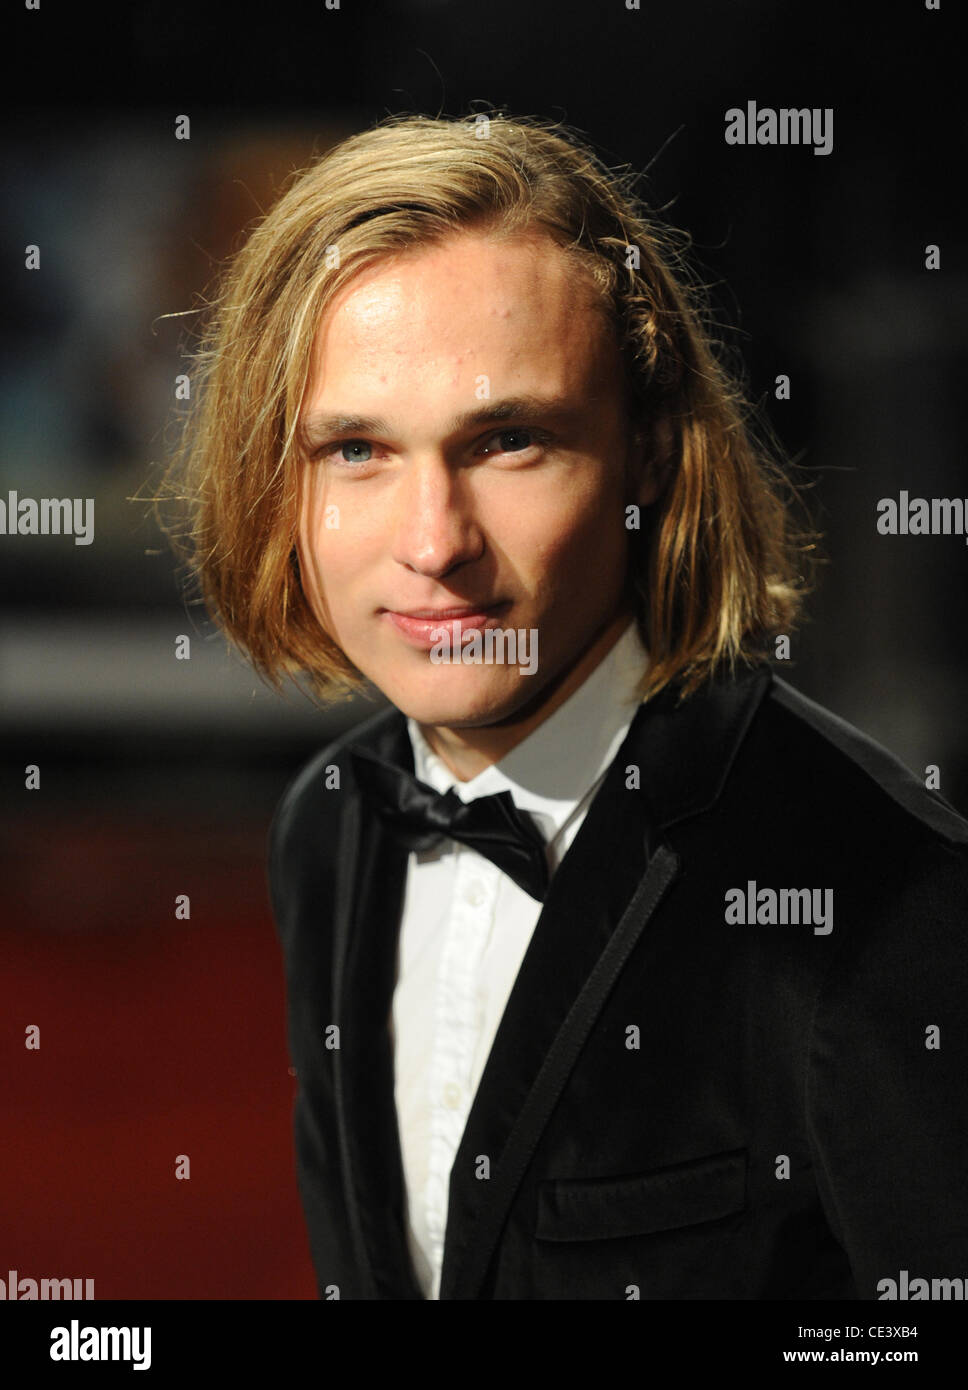 William Moseley  The Royal Premiere of The Chronicles of Narnia: The Voyage of the Dawn Treader at the Odeon Leicester Square.  London, England - 30.11.10 Stock Photo